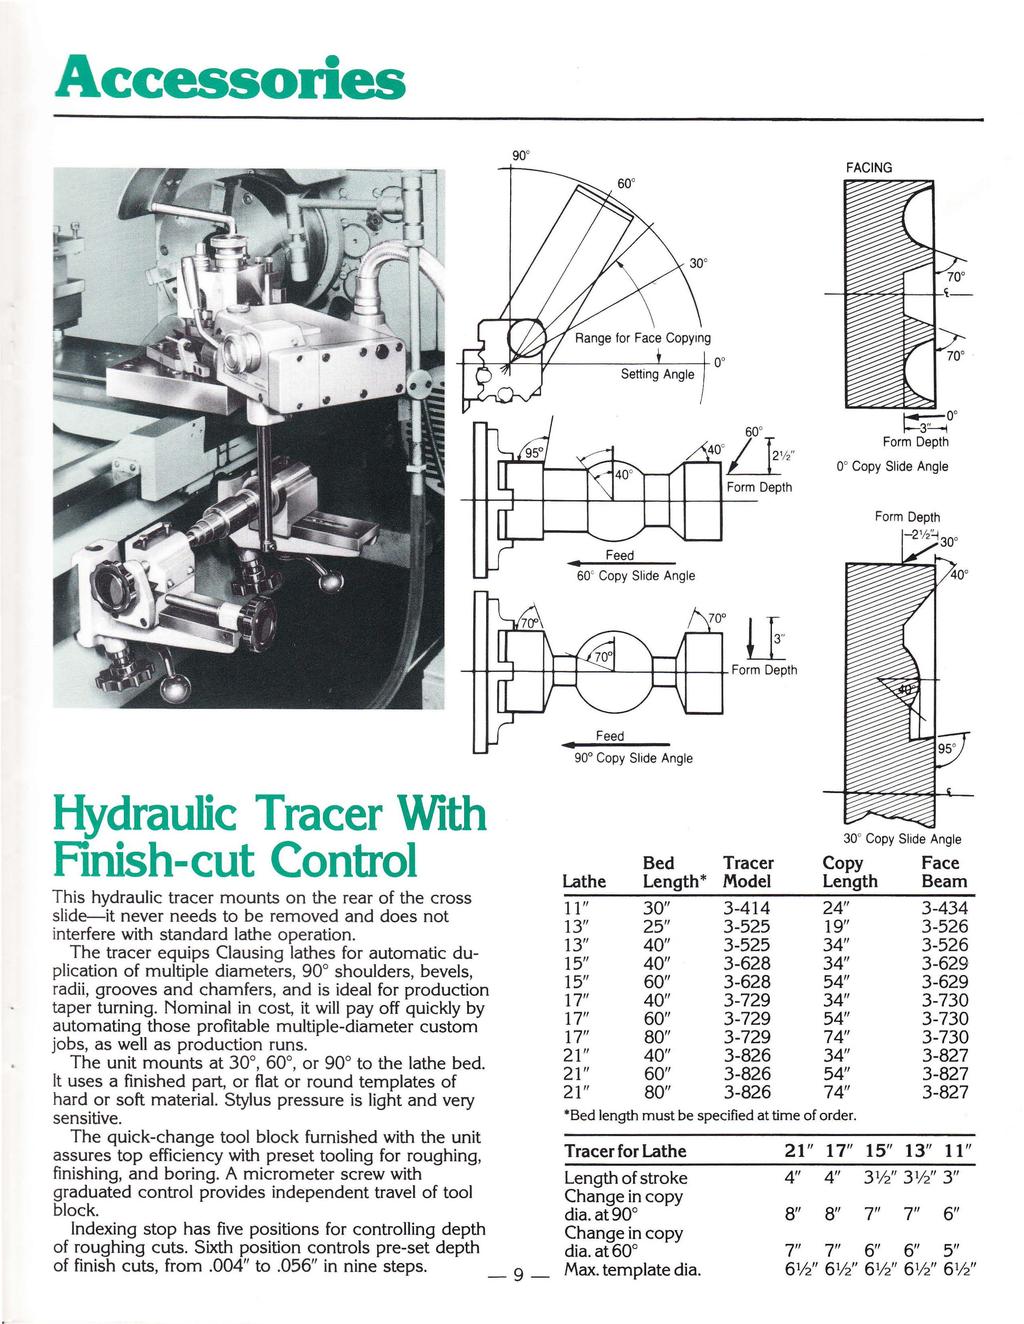 Accessories 90' FACING 30' Form Depth 0' Copy Slide Ang le Form Depth u Hydraulic Tracer With Finish-cut Control This hydraulic tracer mounts on the rear of the cross slide--it never needs to be